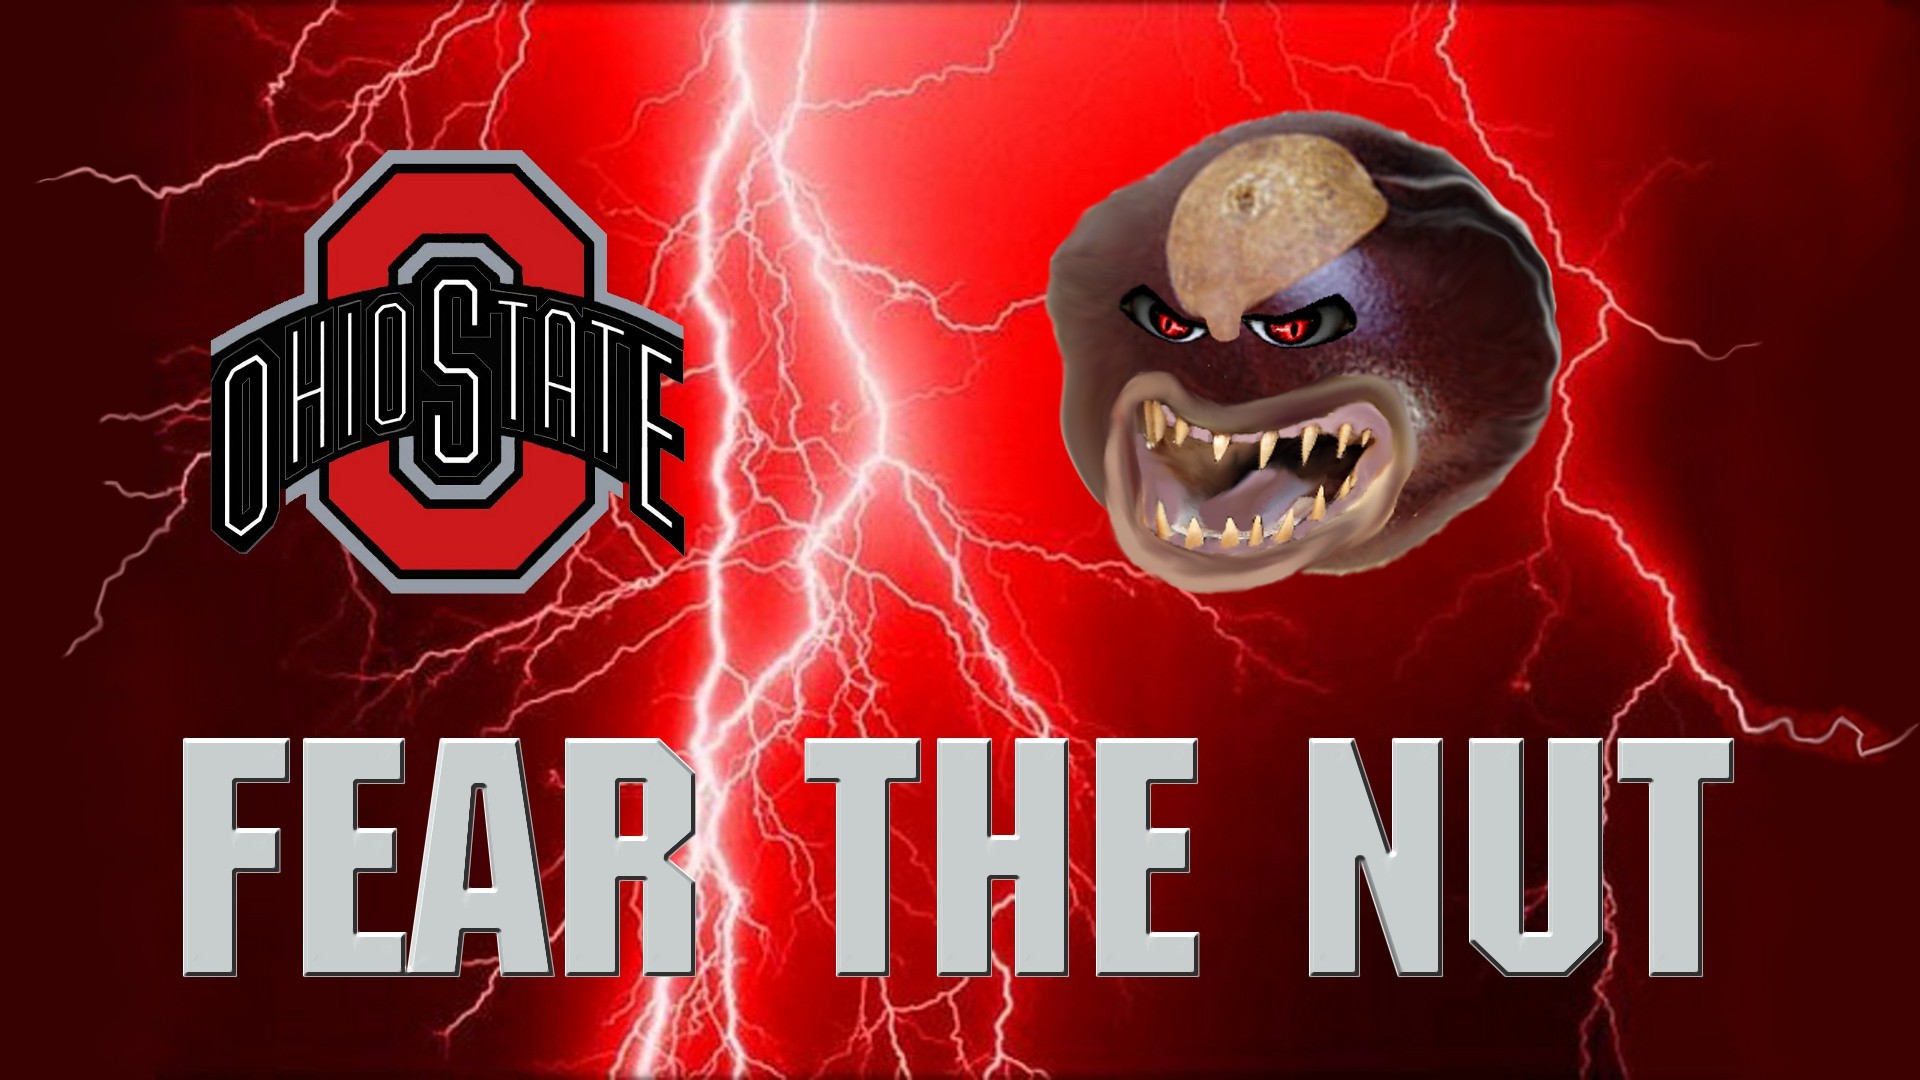 1920x1080 Find this Pin and more on Ohio state.